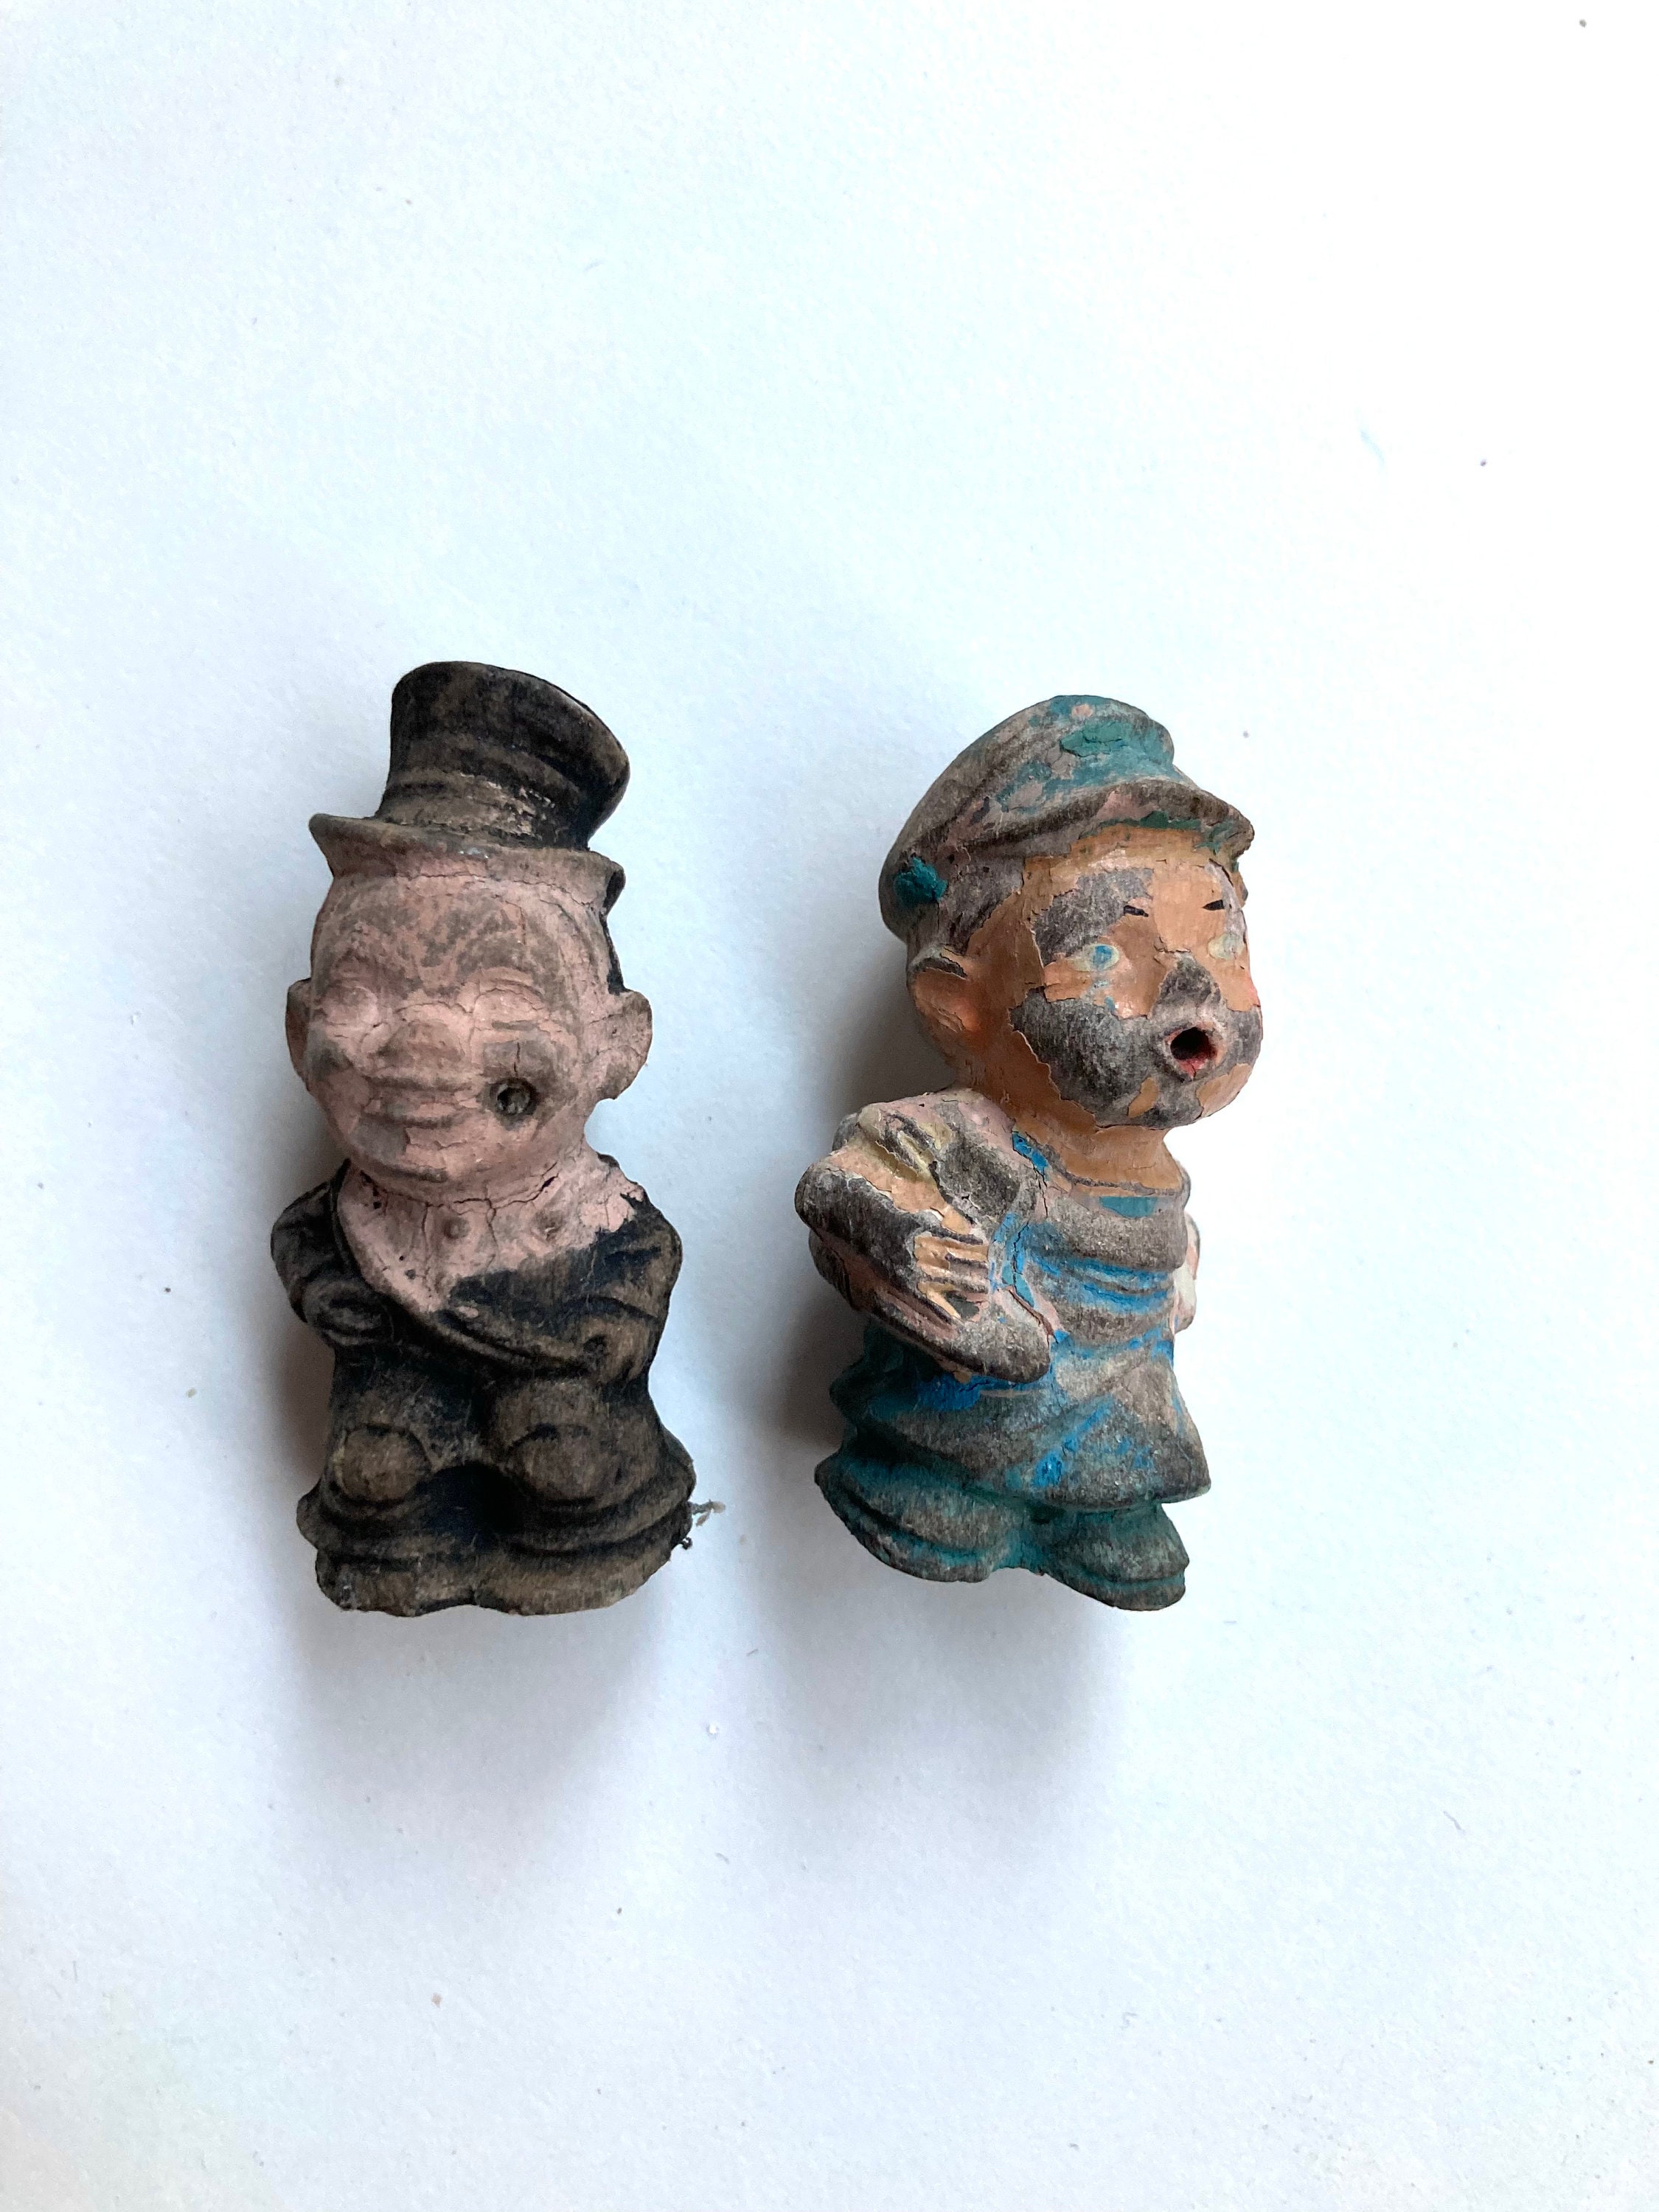 Two Vintage Little Rubber Toys, Smokey Joe Novelty That Used to